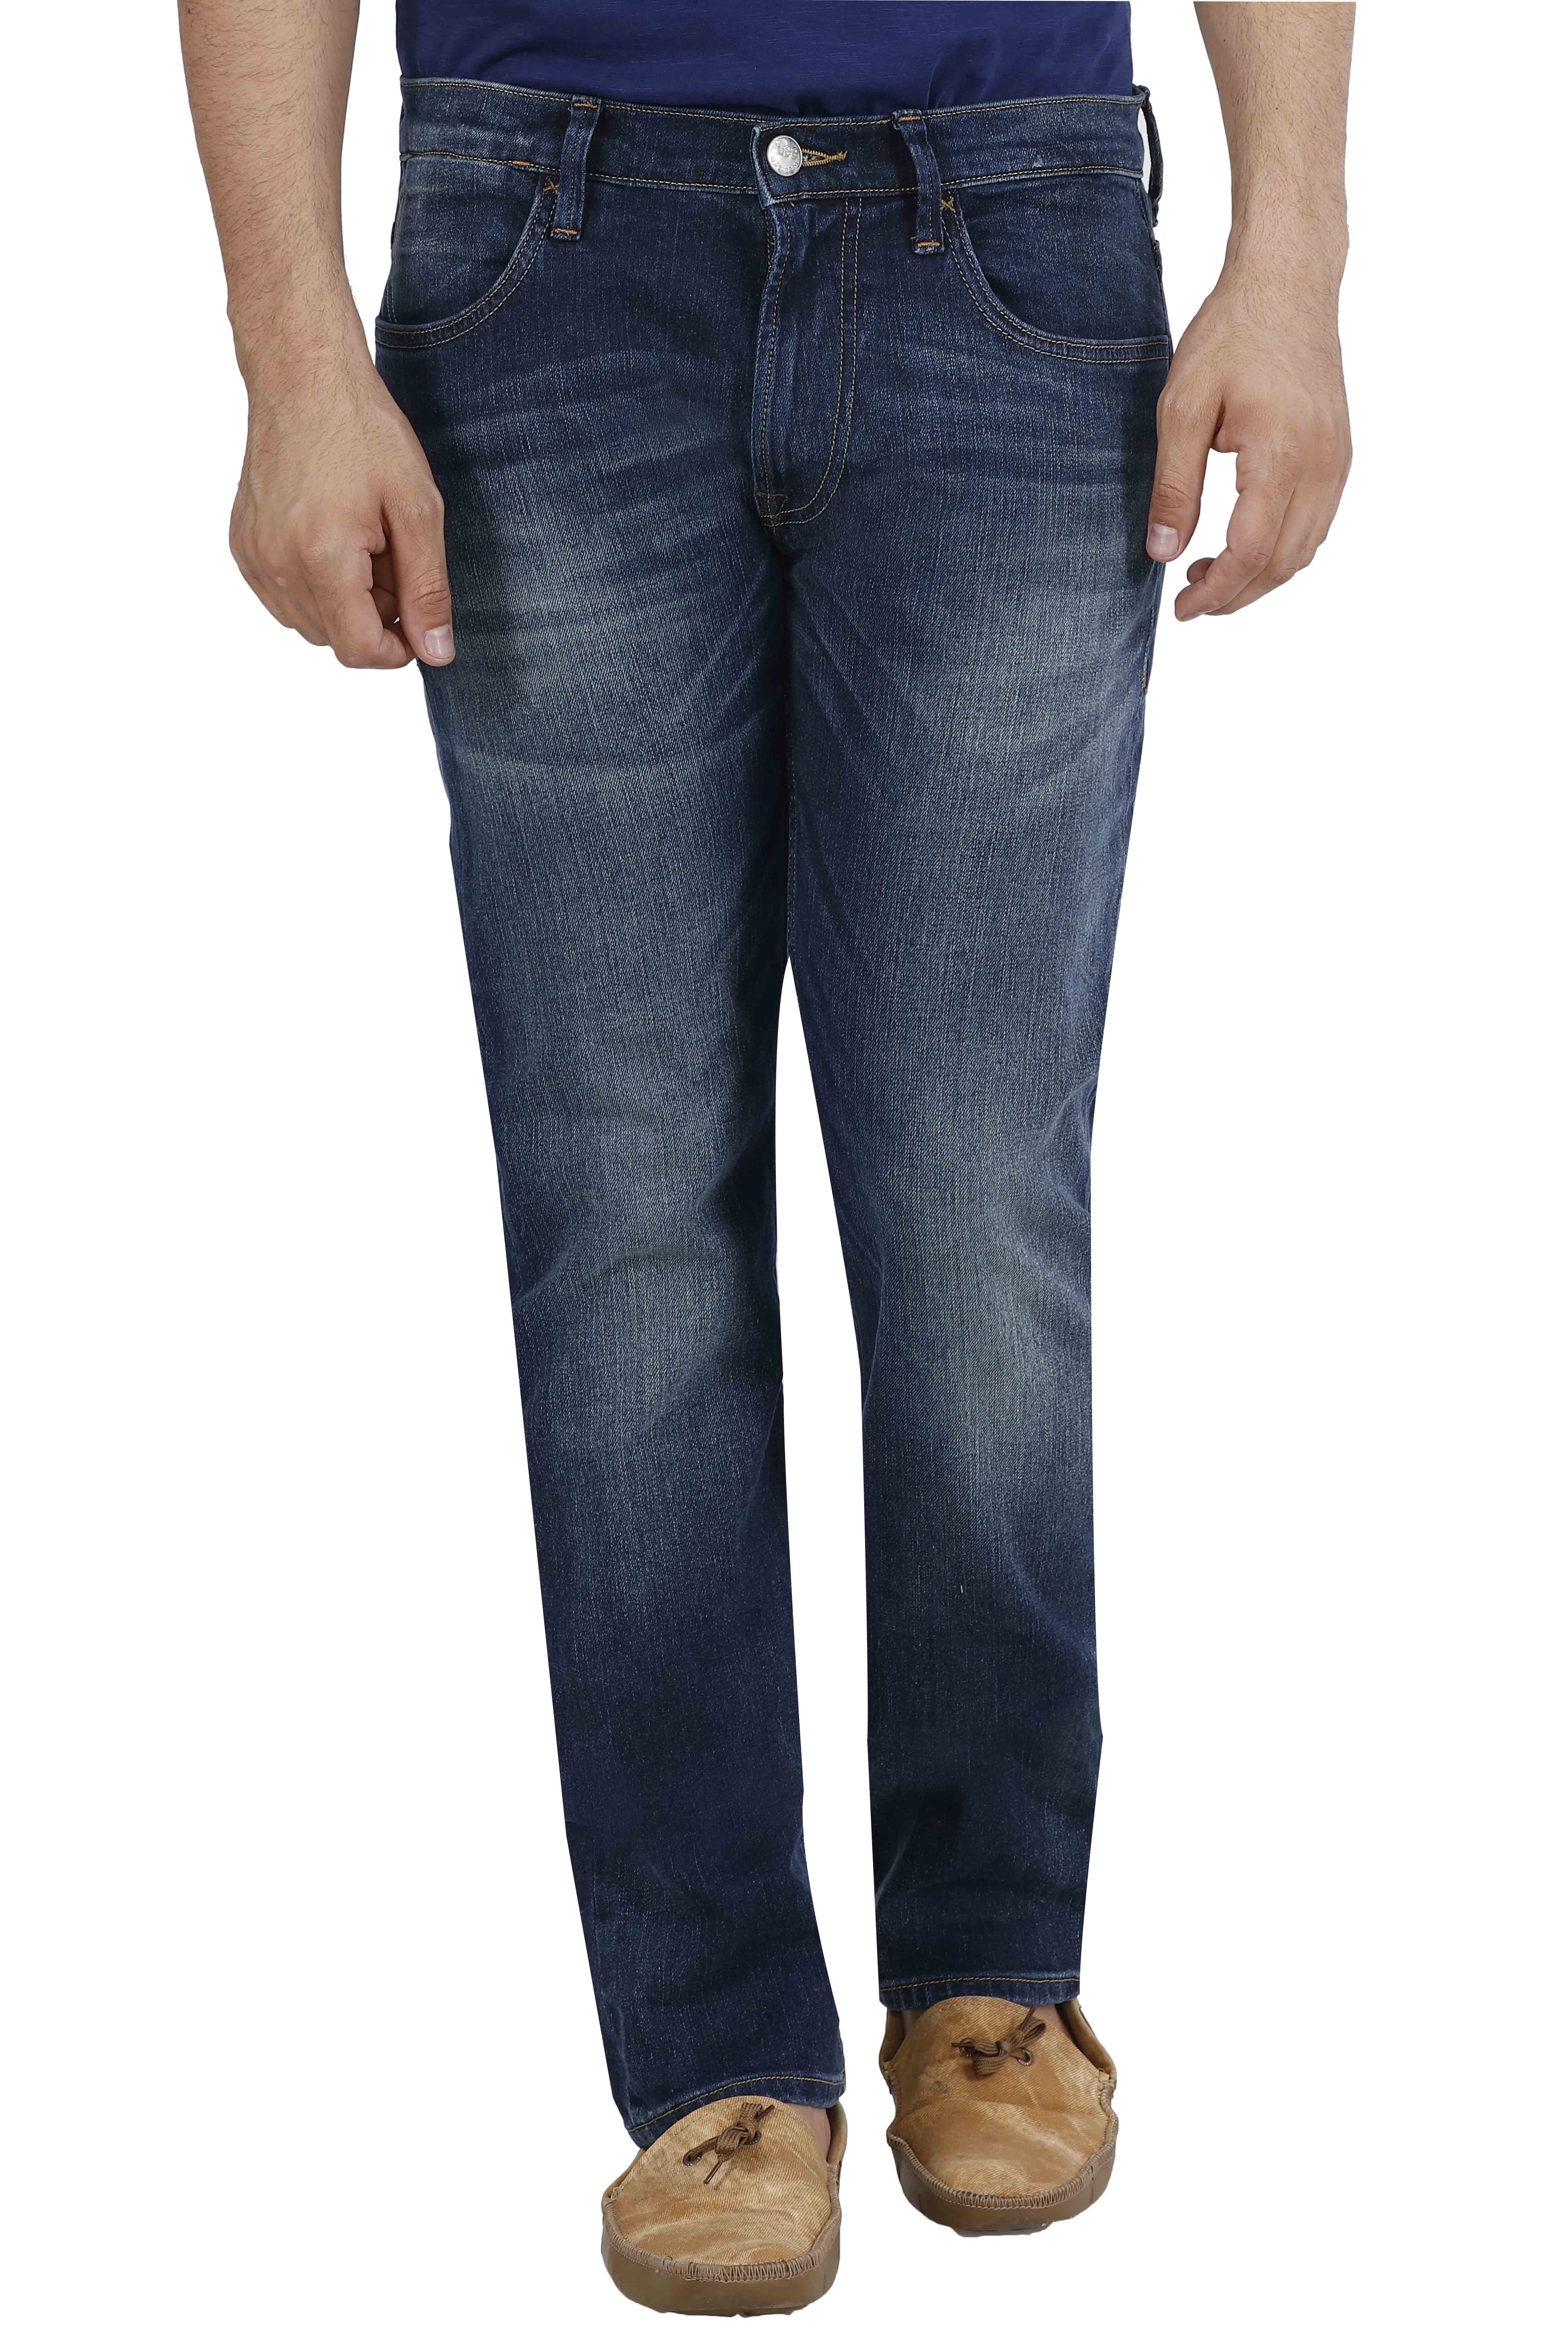 Buy Lee Green Slim Fit Jeans For Men Online @ ₹1799 from ShopClues